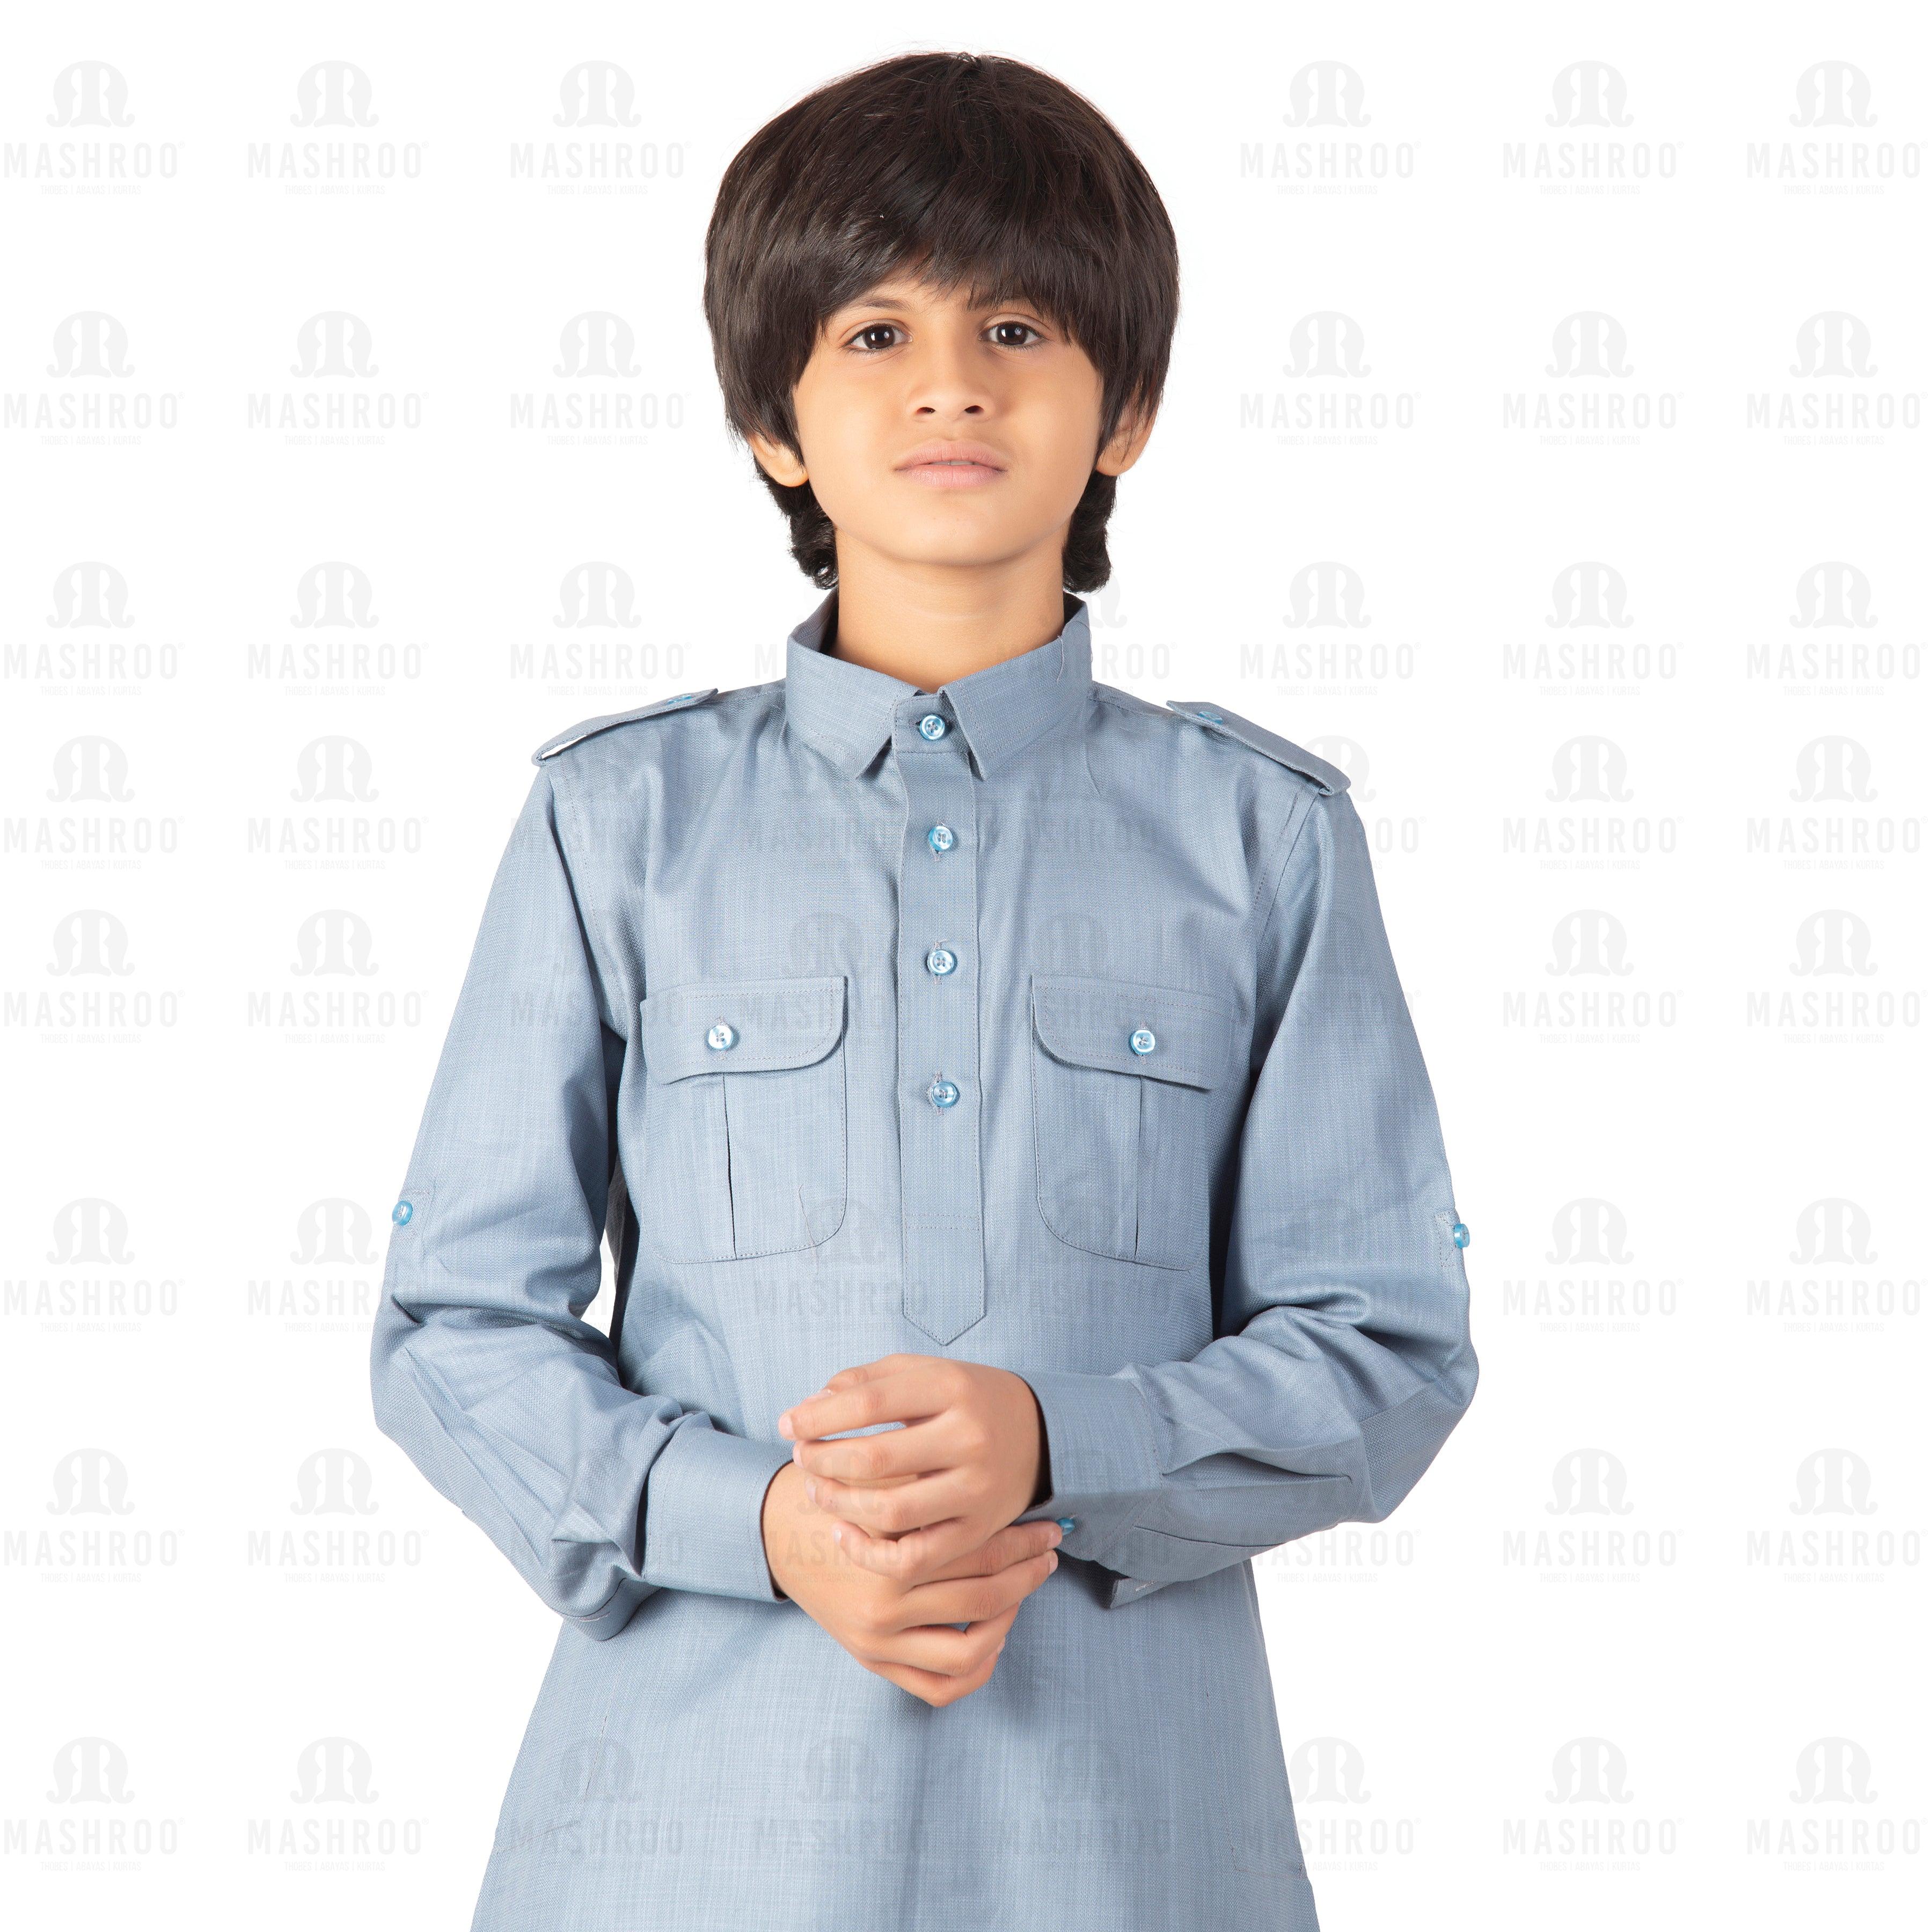 Powder Blue Pathani Suit for Kids